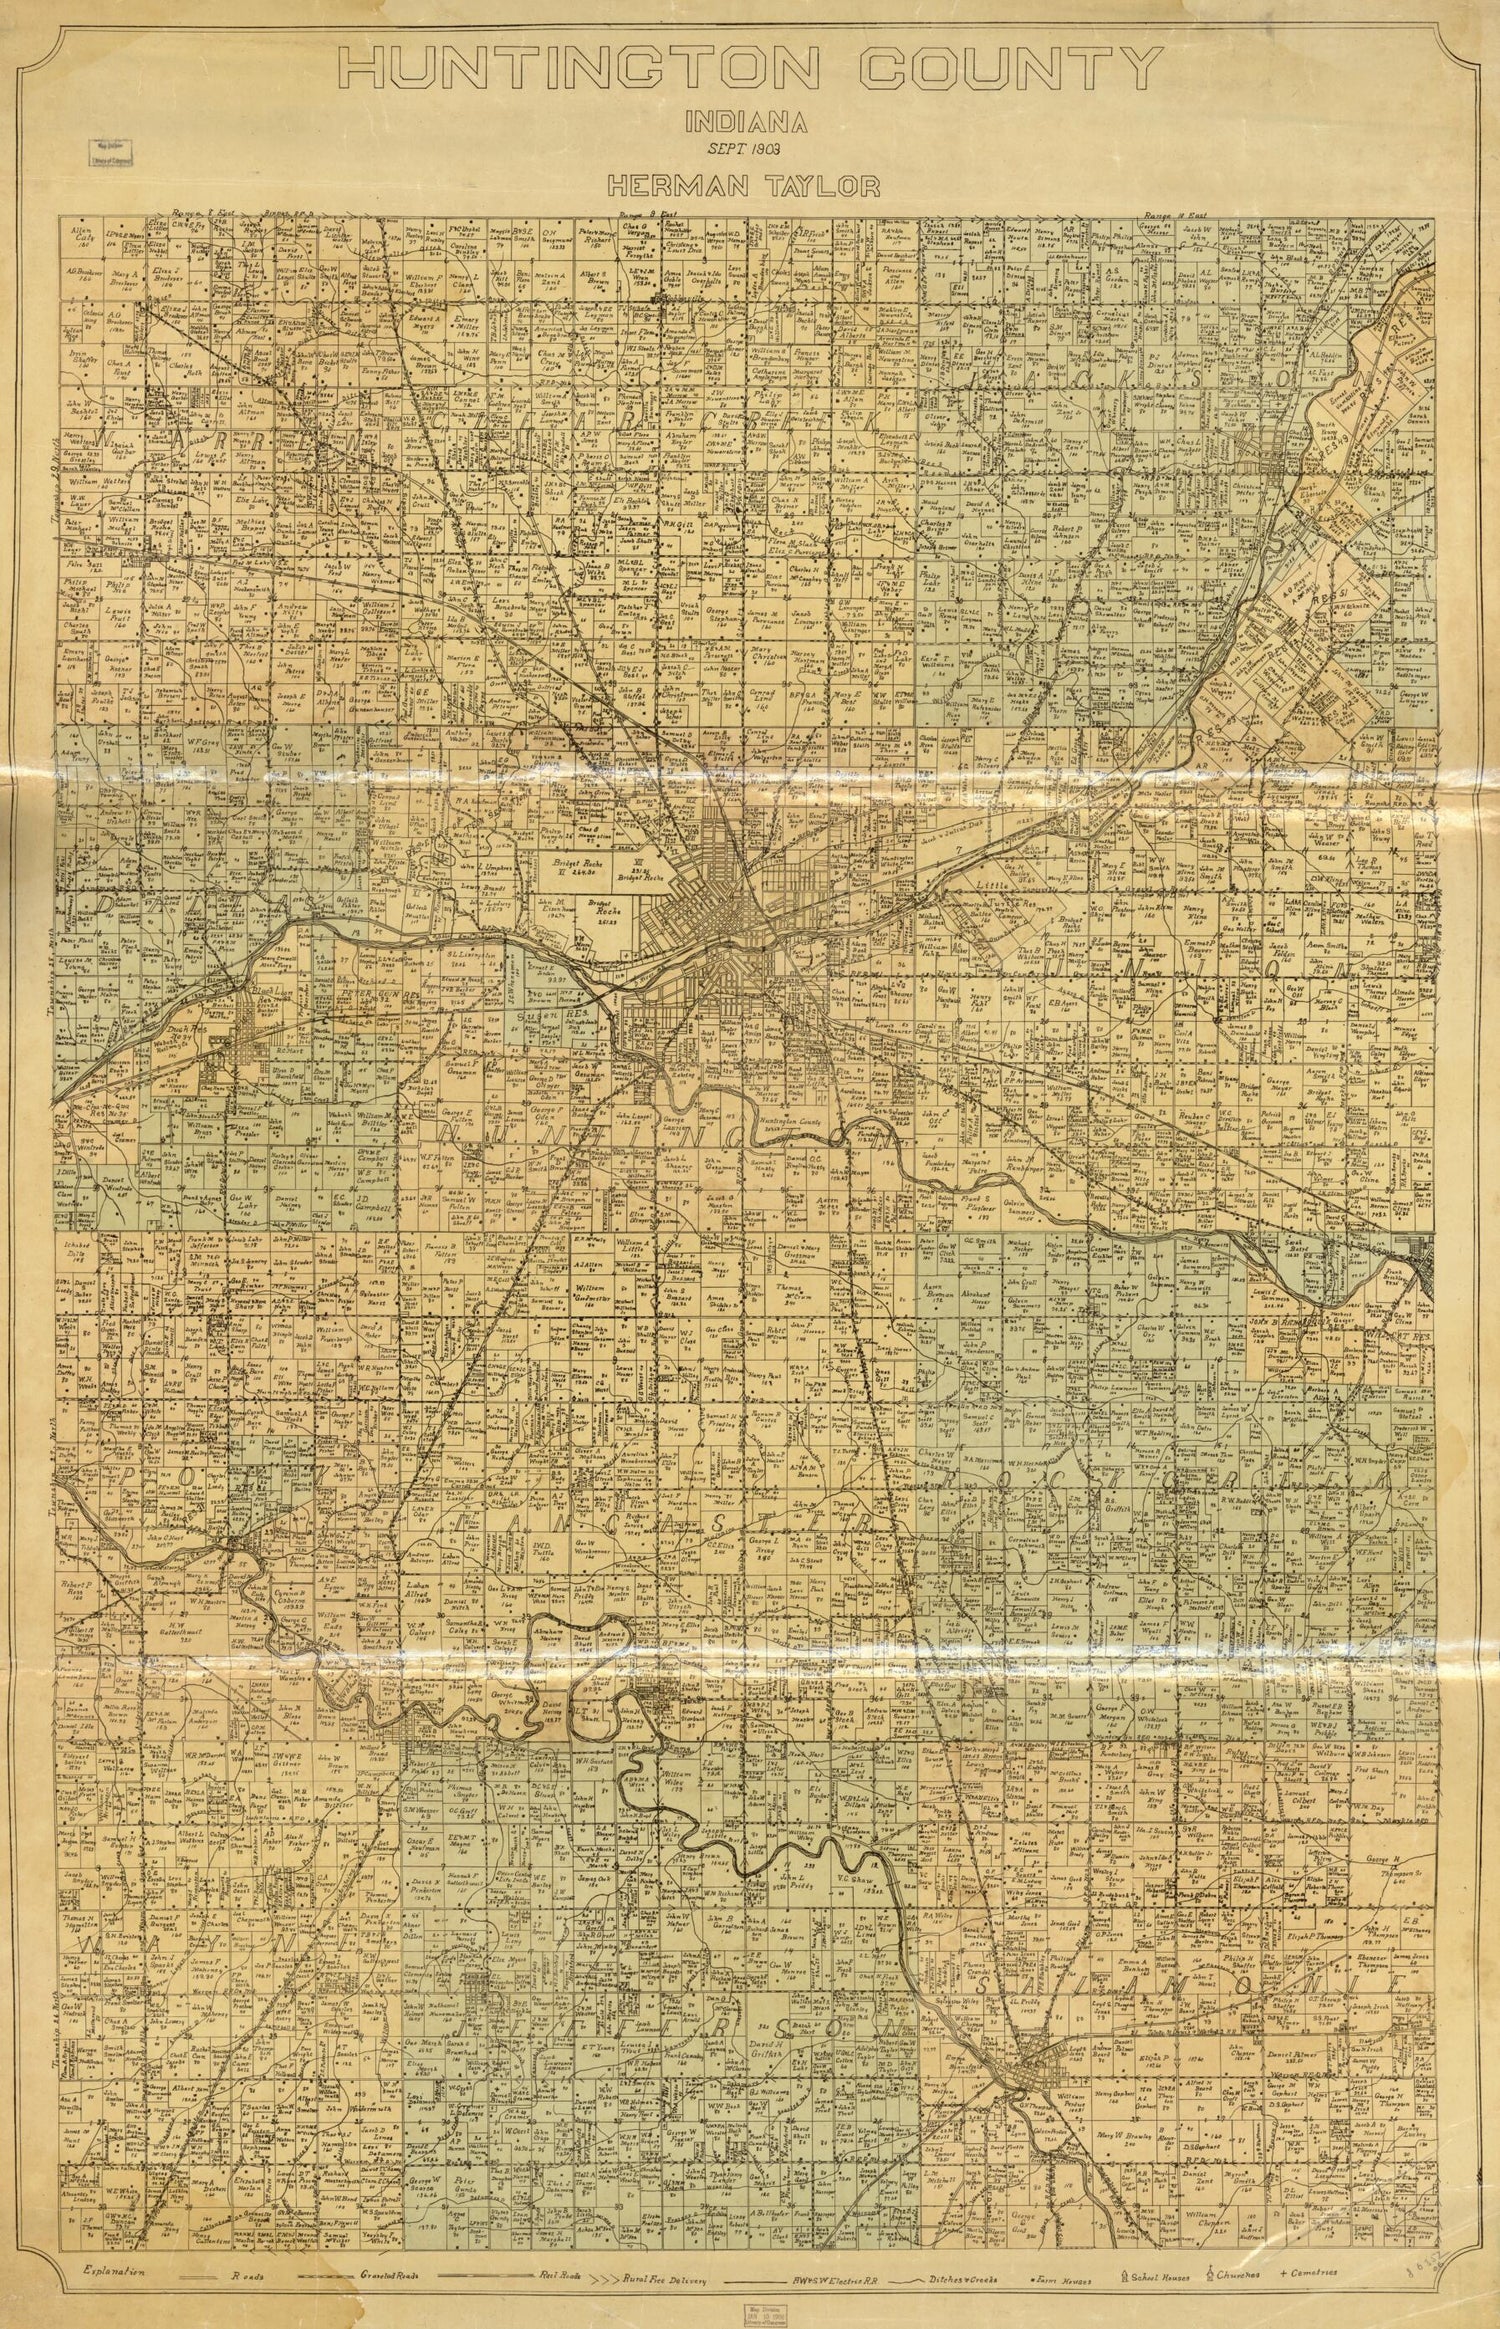 This old map of Huntington County, Indiana from 1903 was created by Herman Taylor in 1903